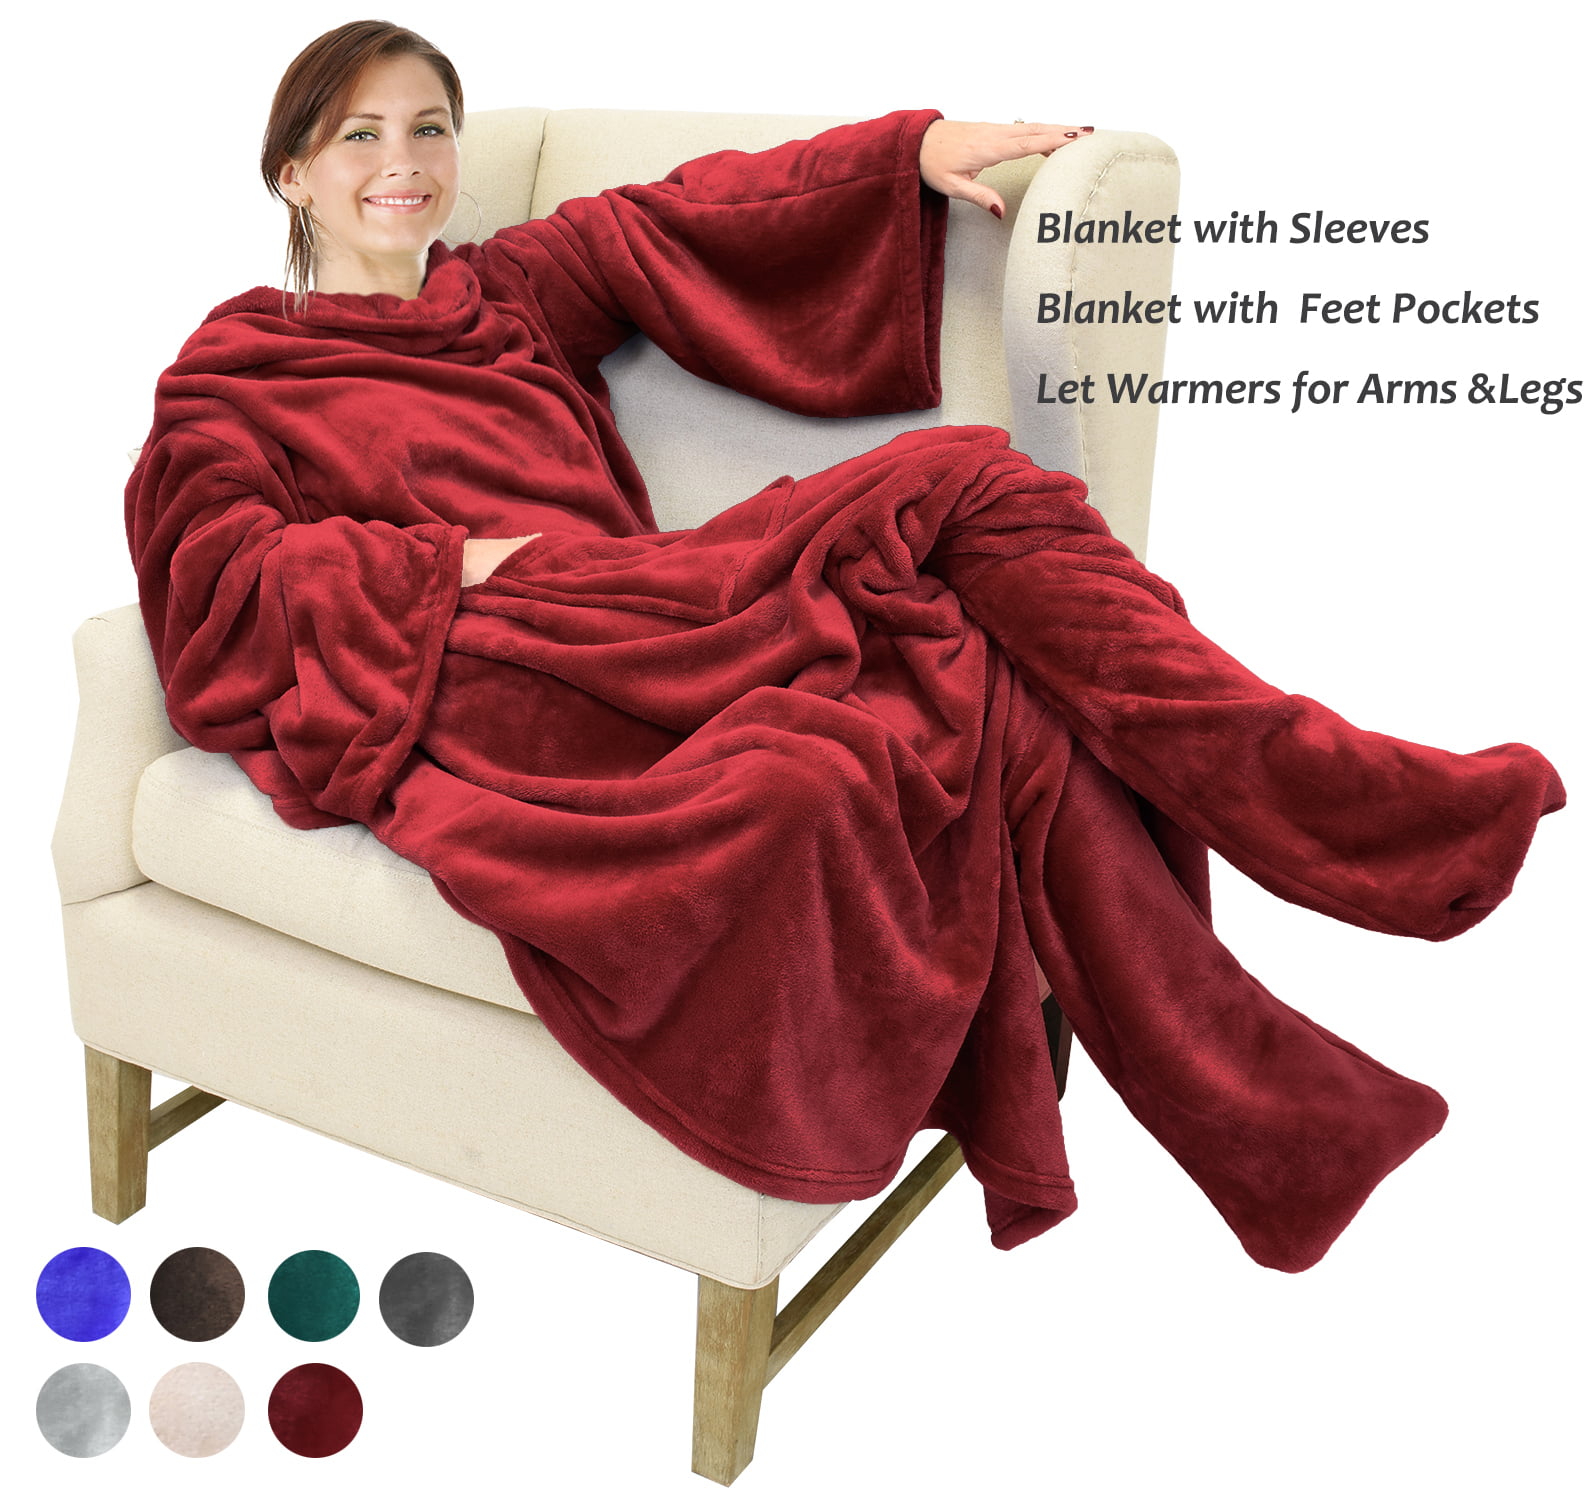 Snuggie Wearable Fleece Blanket With Sleeves Pockets Full Length Plaid Soft Adult Robe 5602597701244 